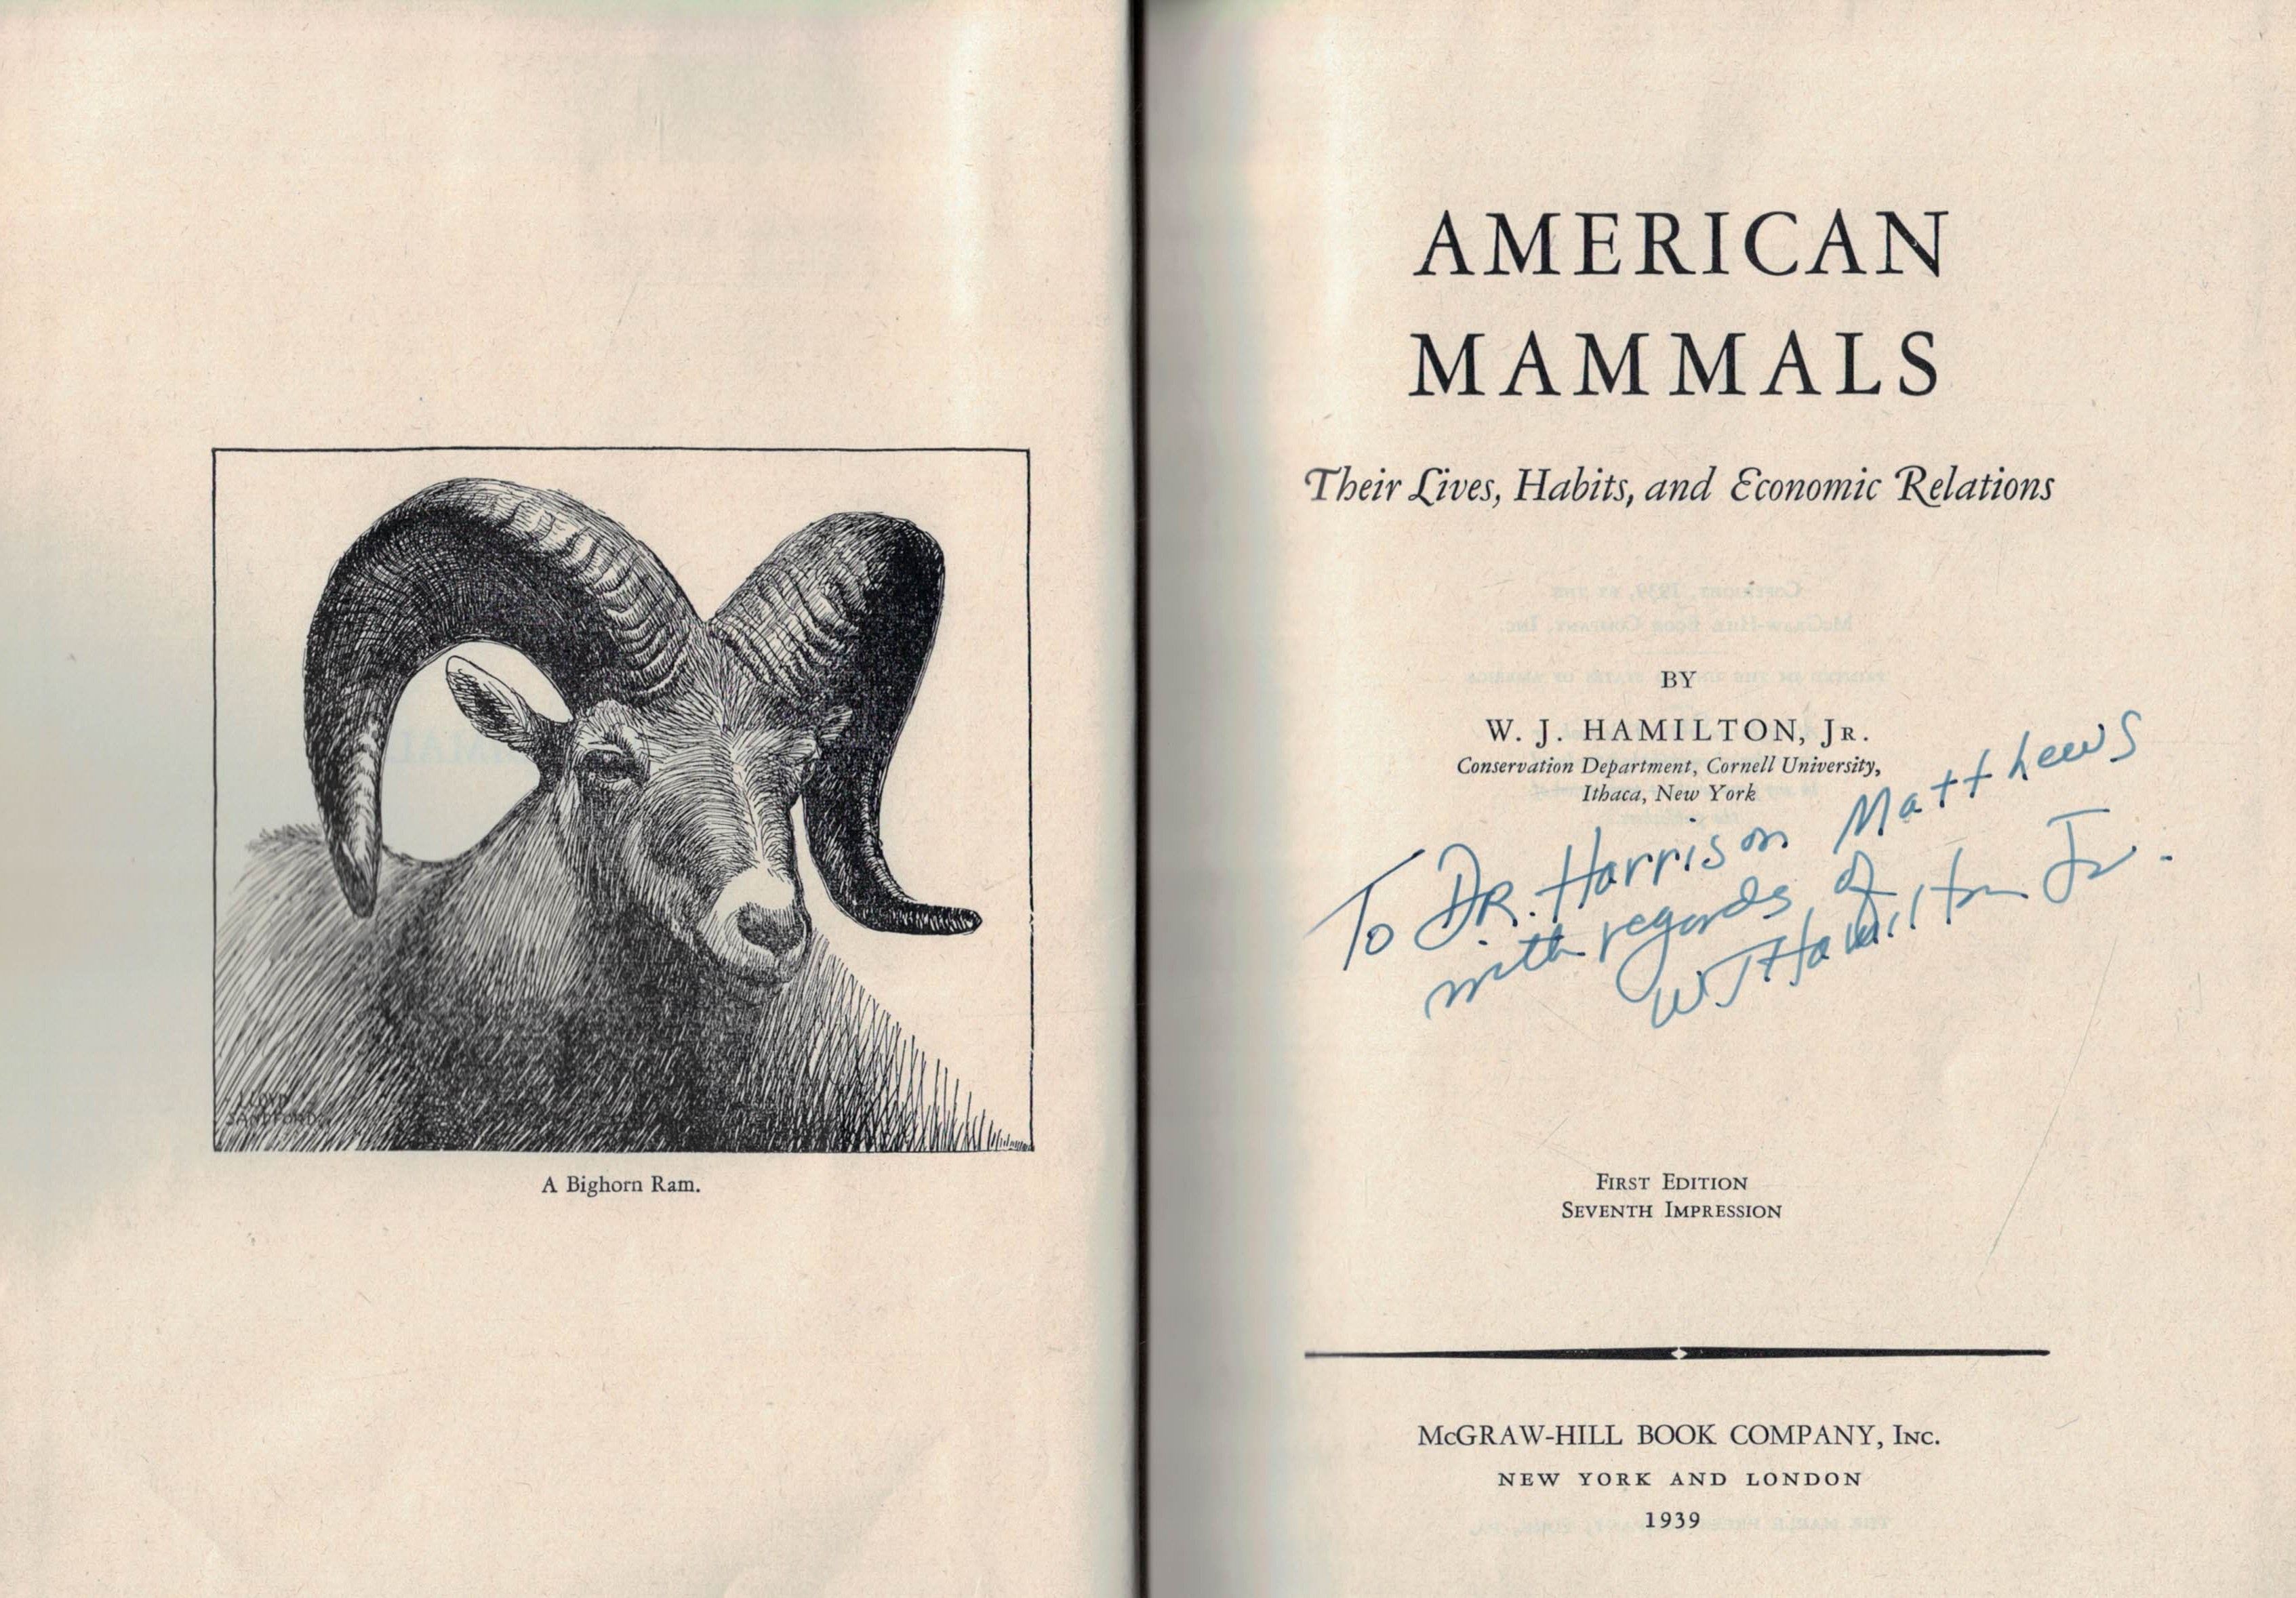 American Mammals. Their Lives, Habits, and Economic Relations. Signed copy.